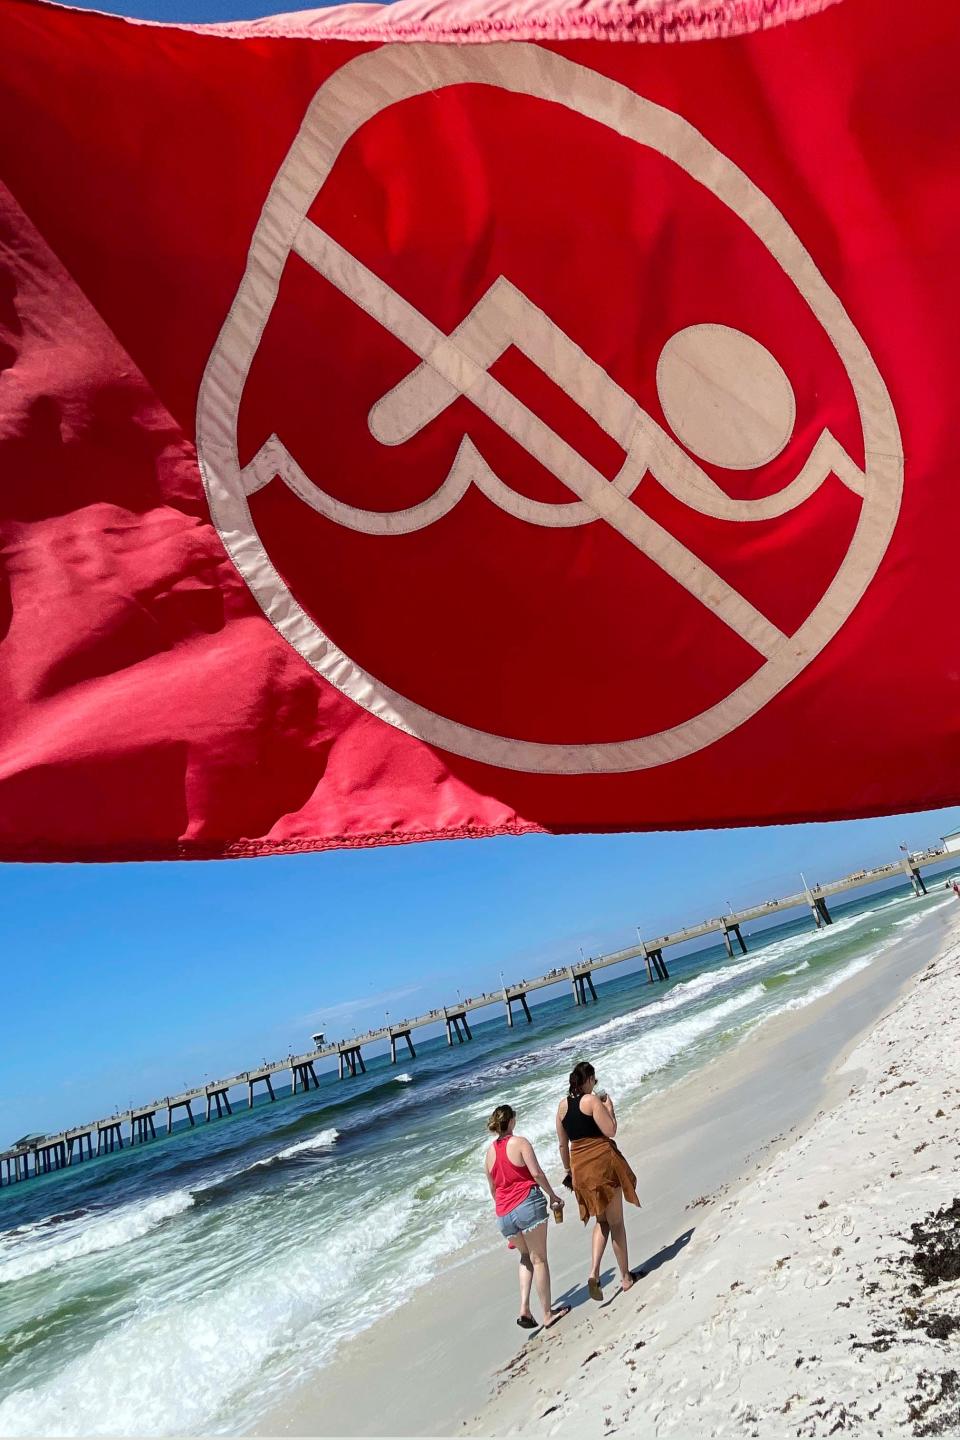 Special red flags mark a portion of the beach near The Boardwalk on Okaloosa Island where rip currents pose a threat. The red flags, which has a circle and cross over the image of a swimmer, are placed at both edges of the rip current area.